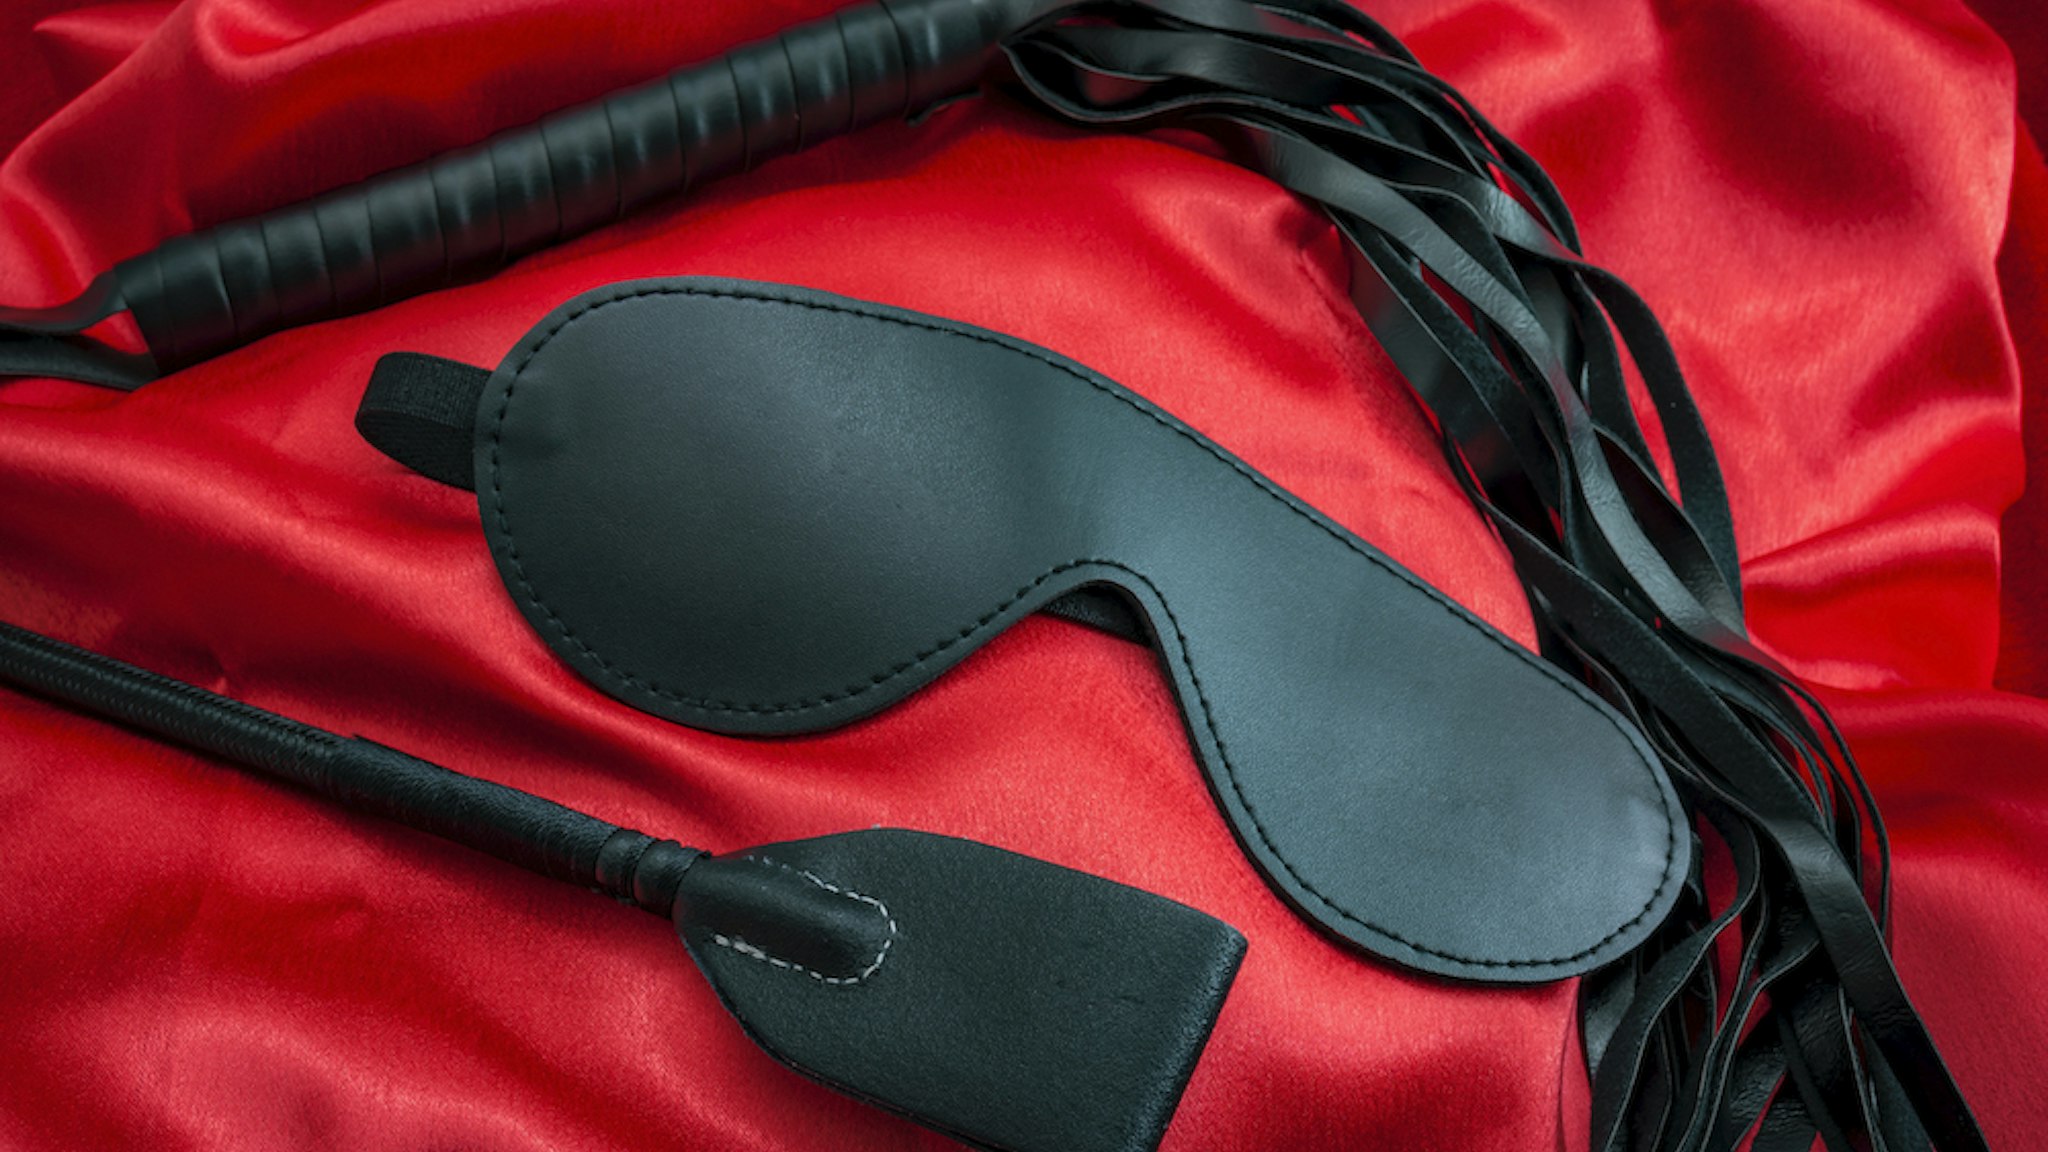 Riding crop, a whip flogger and blindfold mask on red satin, kinky sex toys for dom. (Moussa81 via Getty Images)